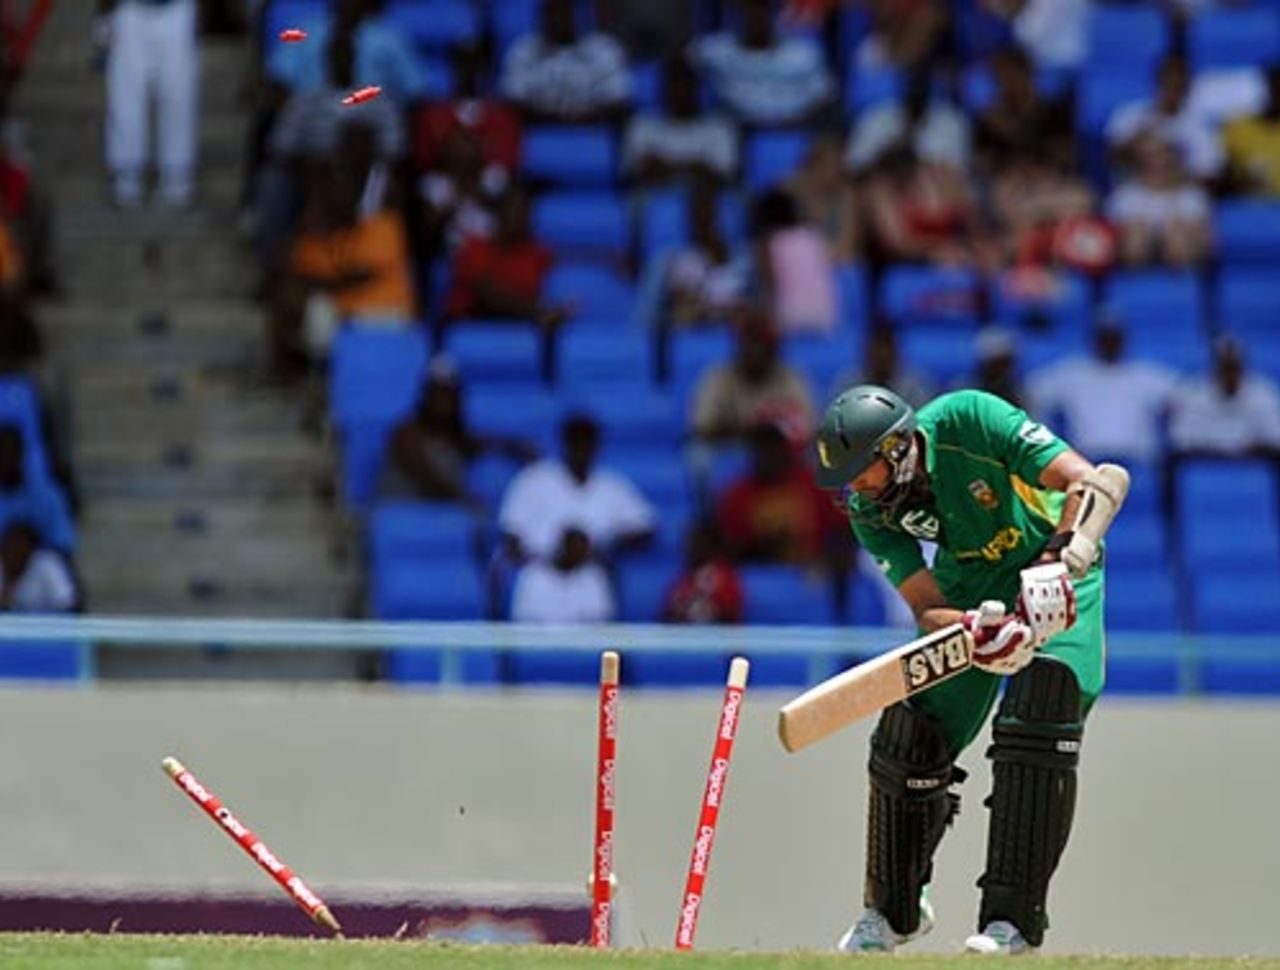 Hashim Amla is bowled by Ravi Rampaul, West Indies v South Africa, 1st ODI, Antigua, May 22, 2010